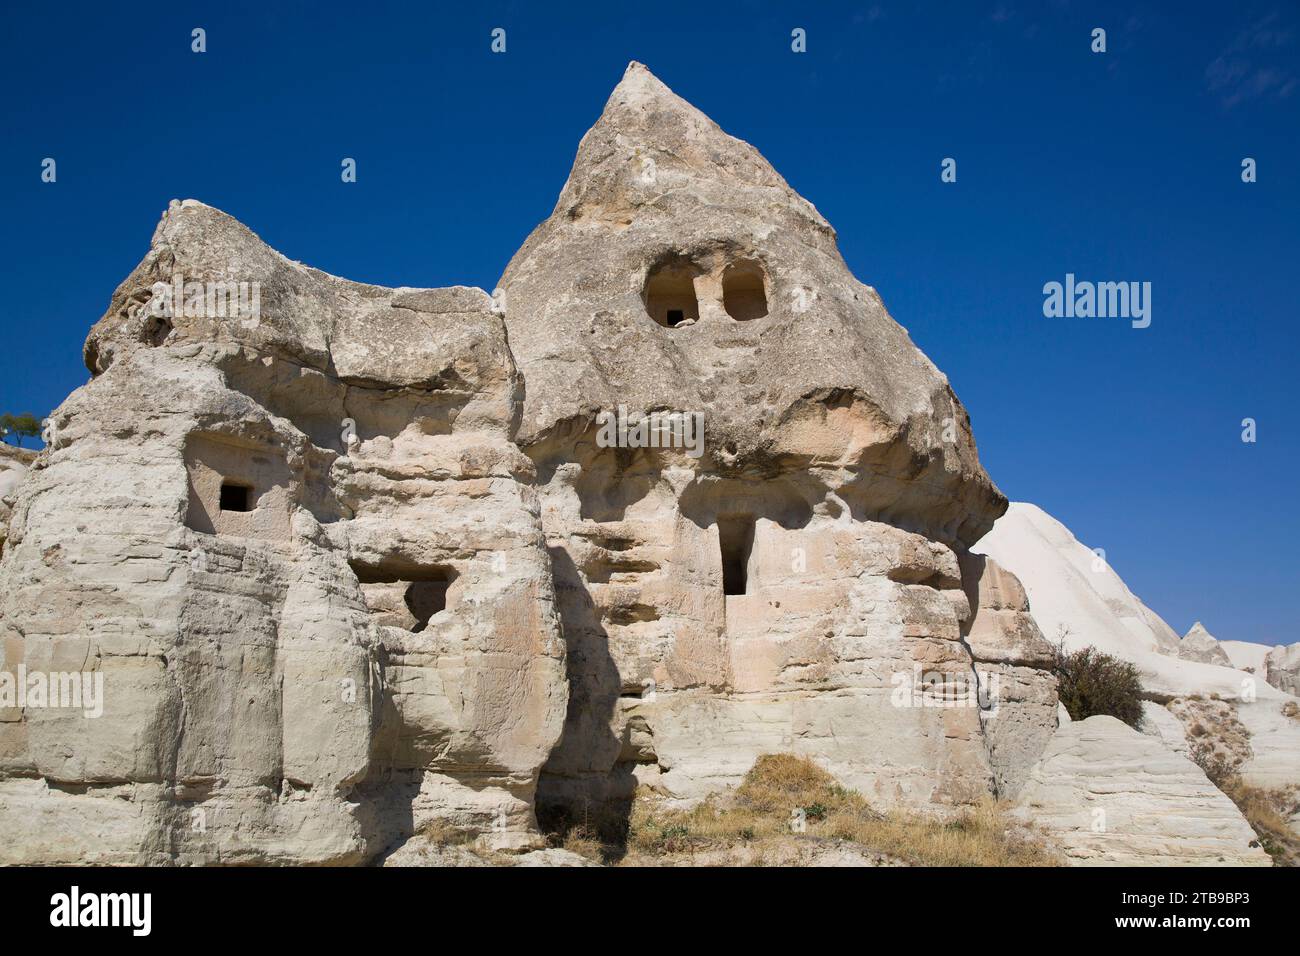 Close-up of a rock house carved into the volcanic rock formations, a Fairy Chimney, against a bright blue sky near the Town of Goreme in Pigeon Val... Stock Photo